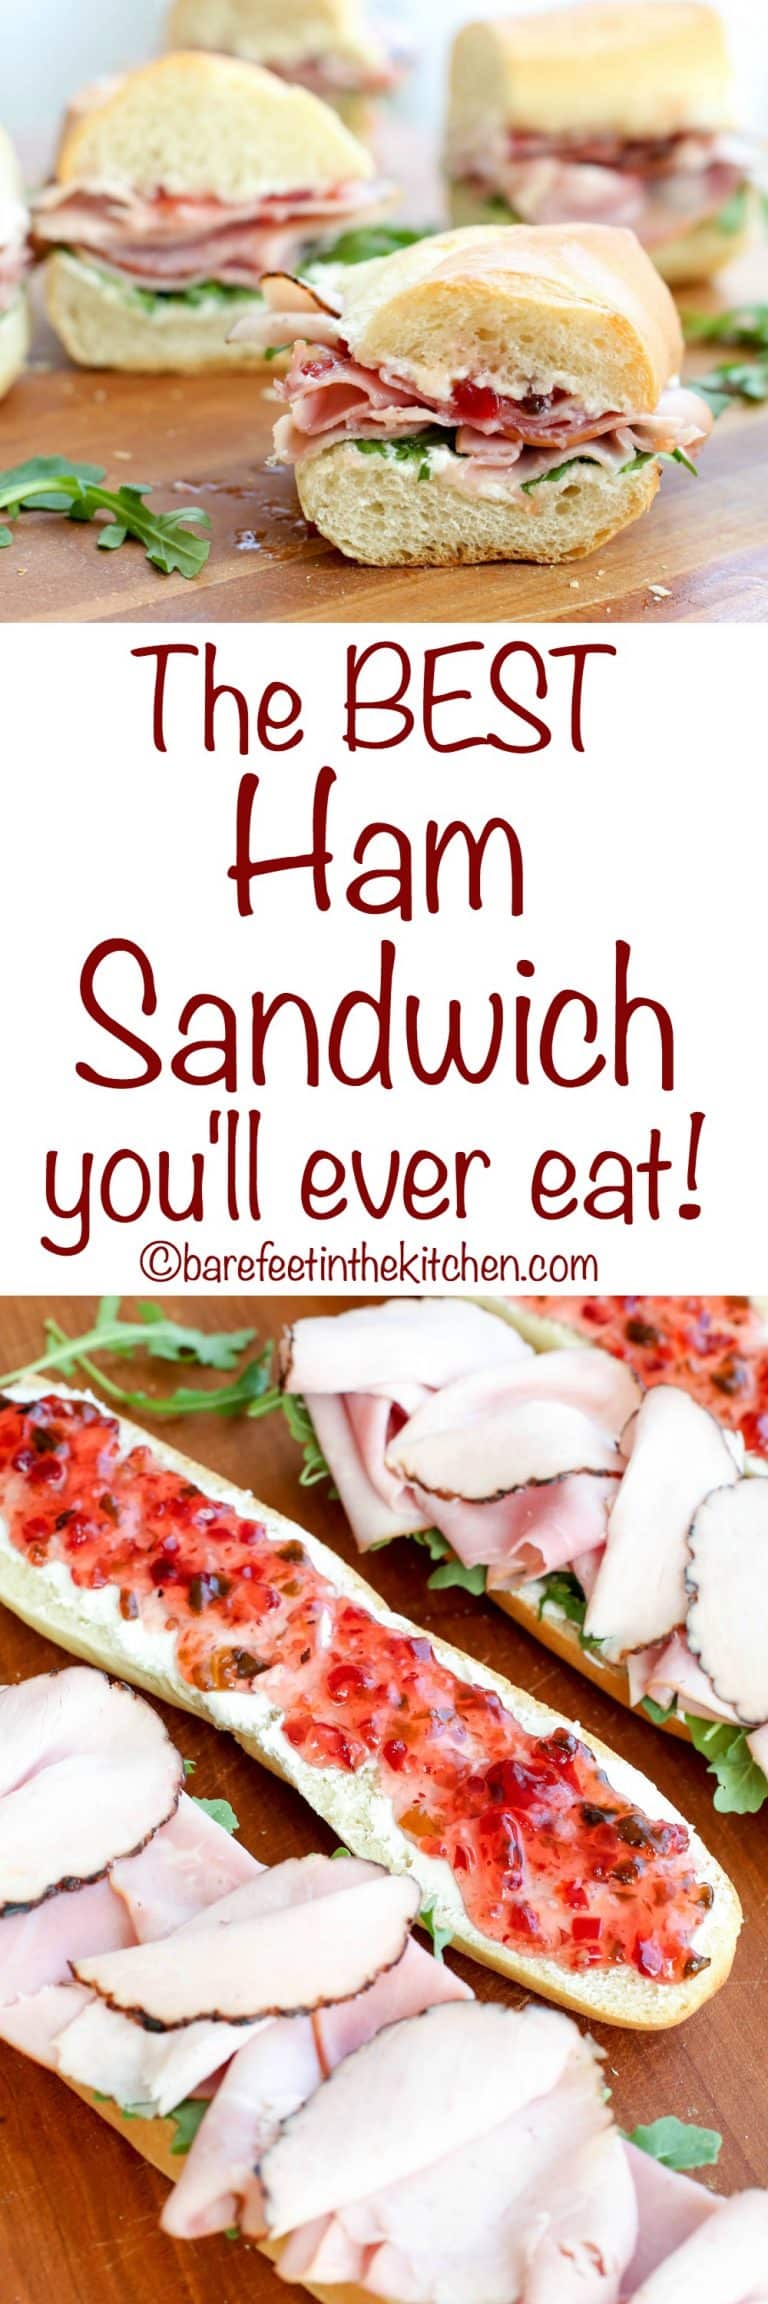 The BEST Ham Sandwich you will ever eat is sweet, spicy, and a little bit of everything! get the recipe at barefeetinthekitchen.com